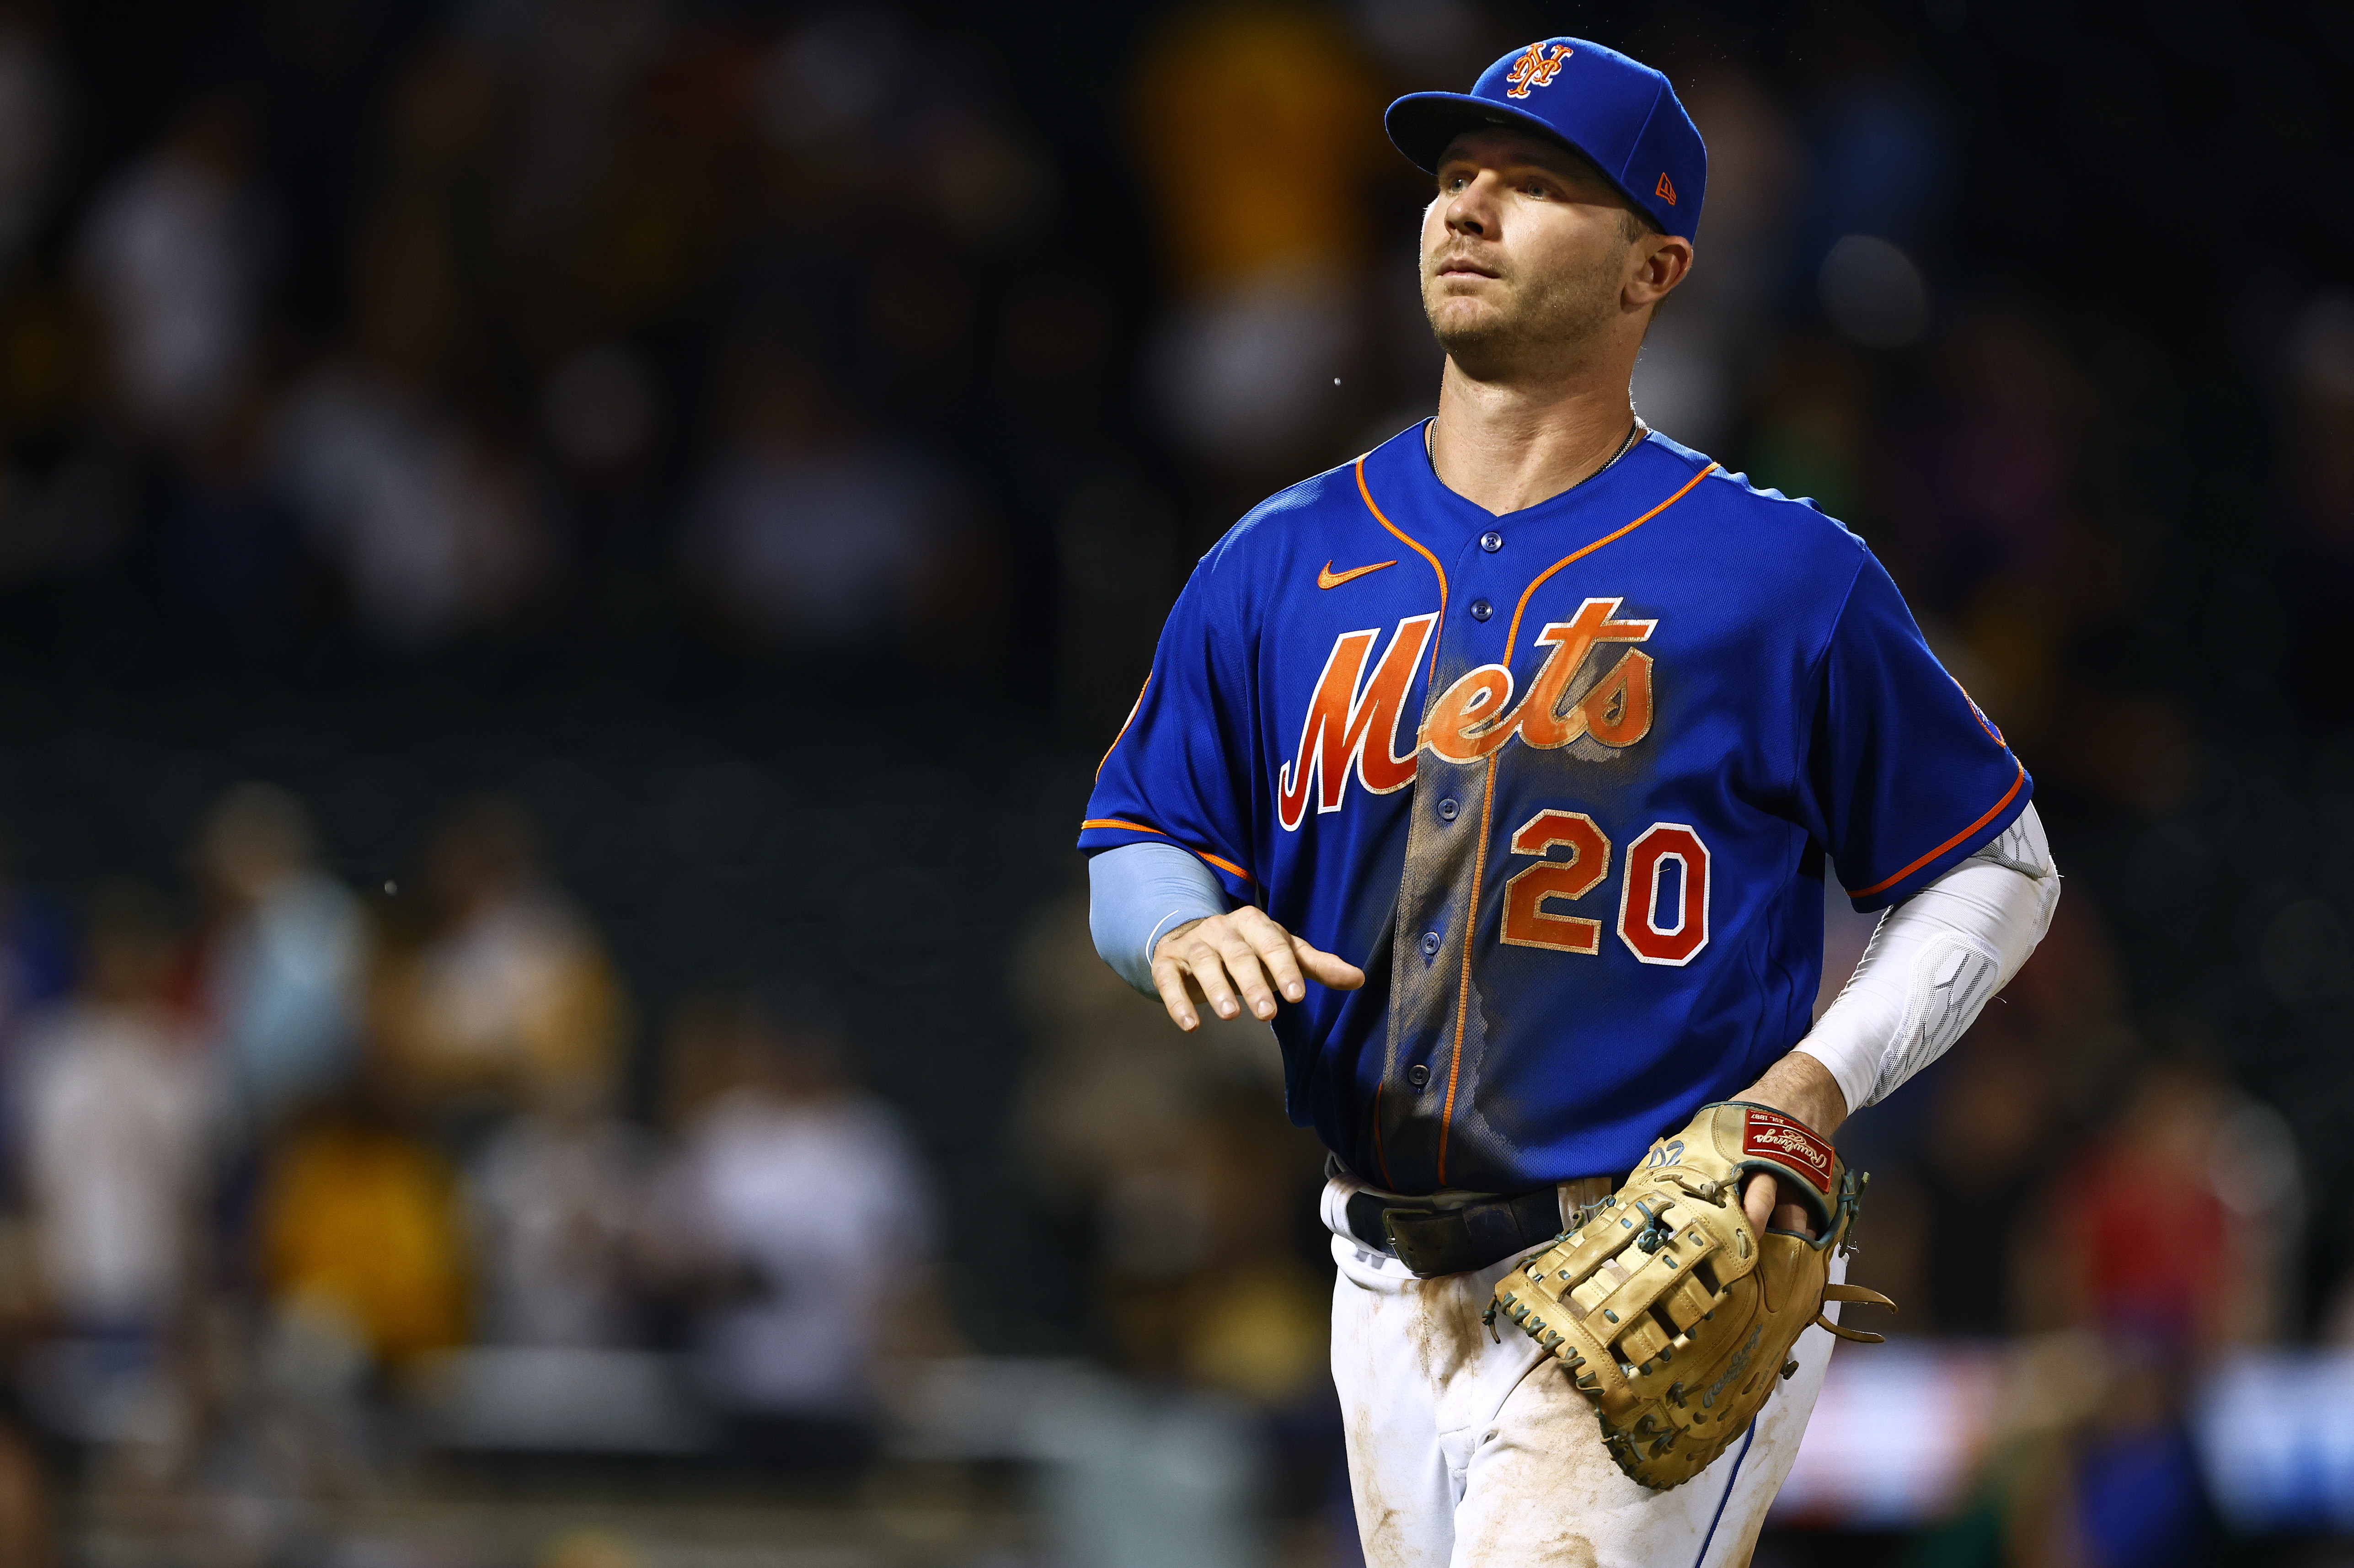 New York Mets 1B Pete Alonso is the happiest man in MLB - Sports